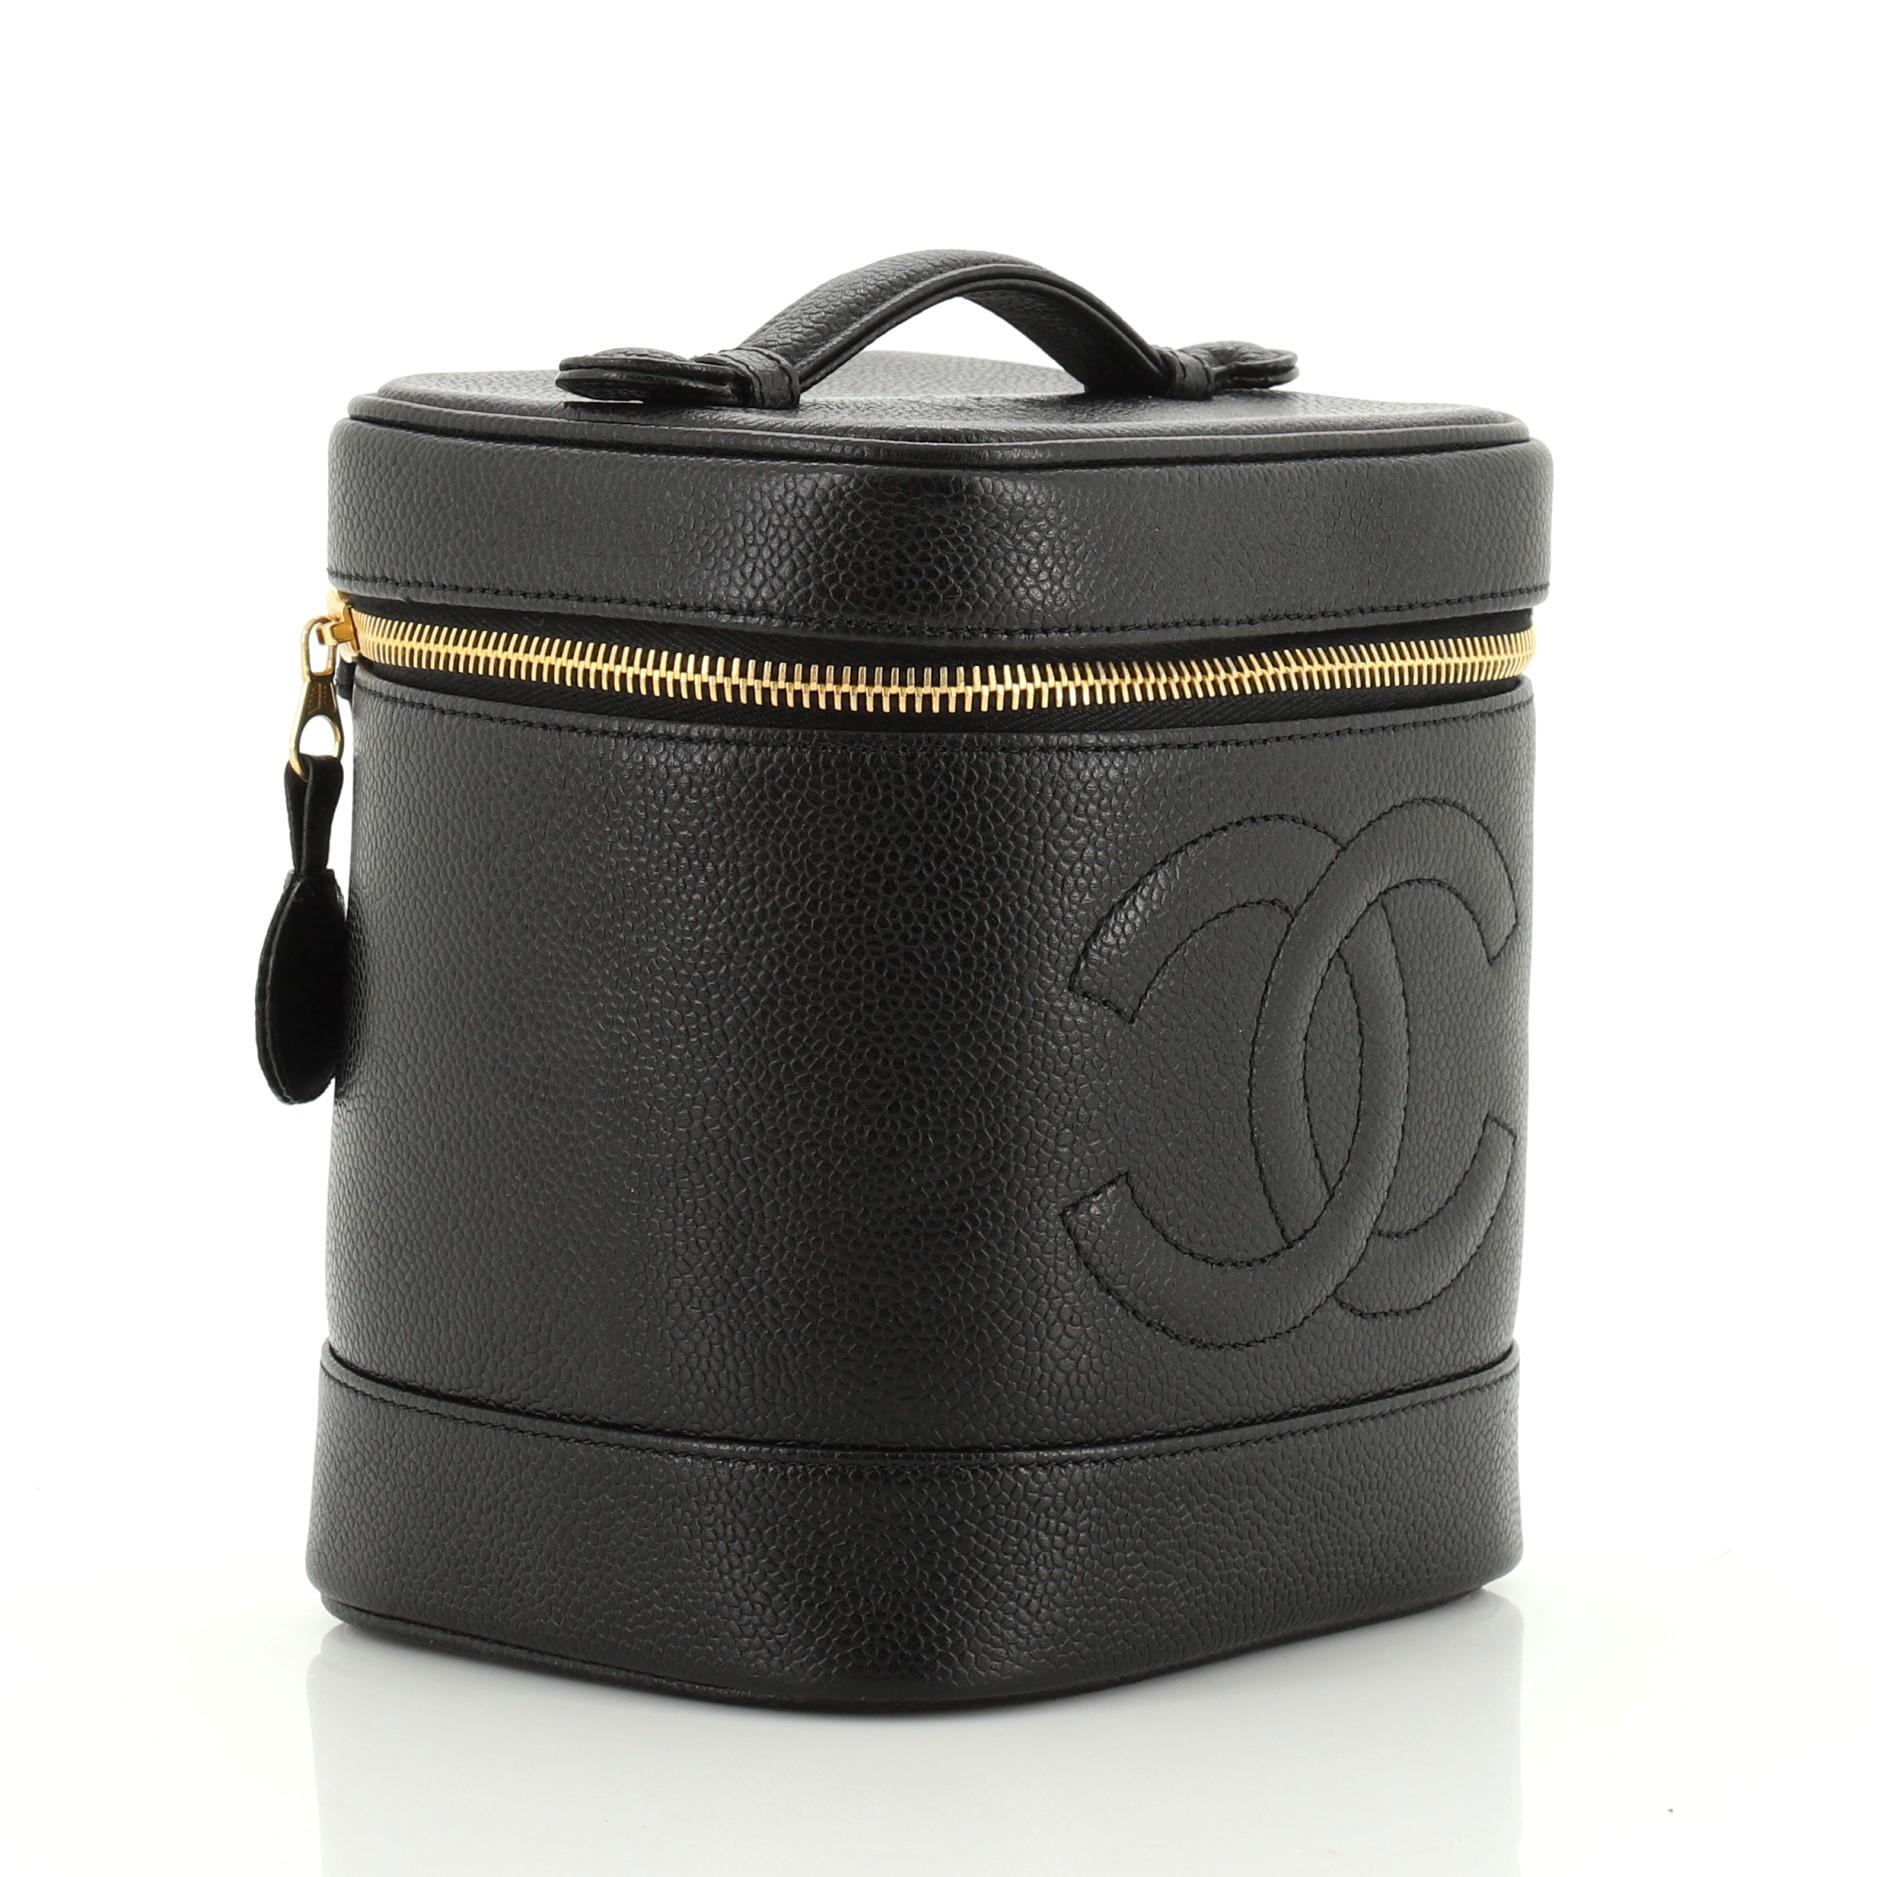 Black Chanel Vintage Timeless Cosmetic Case